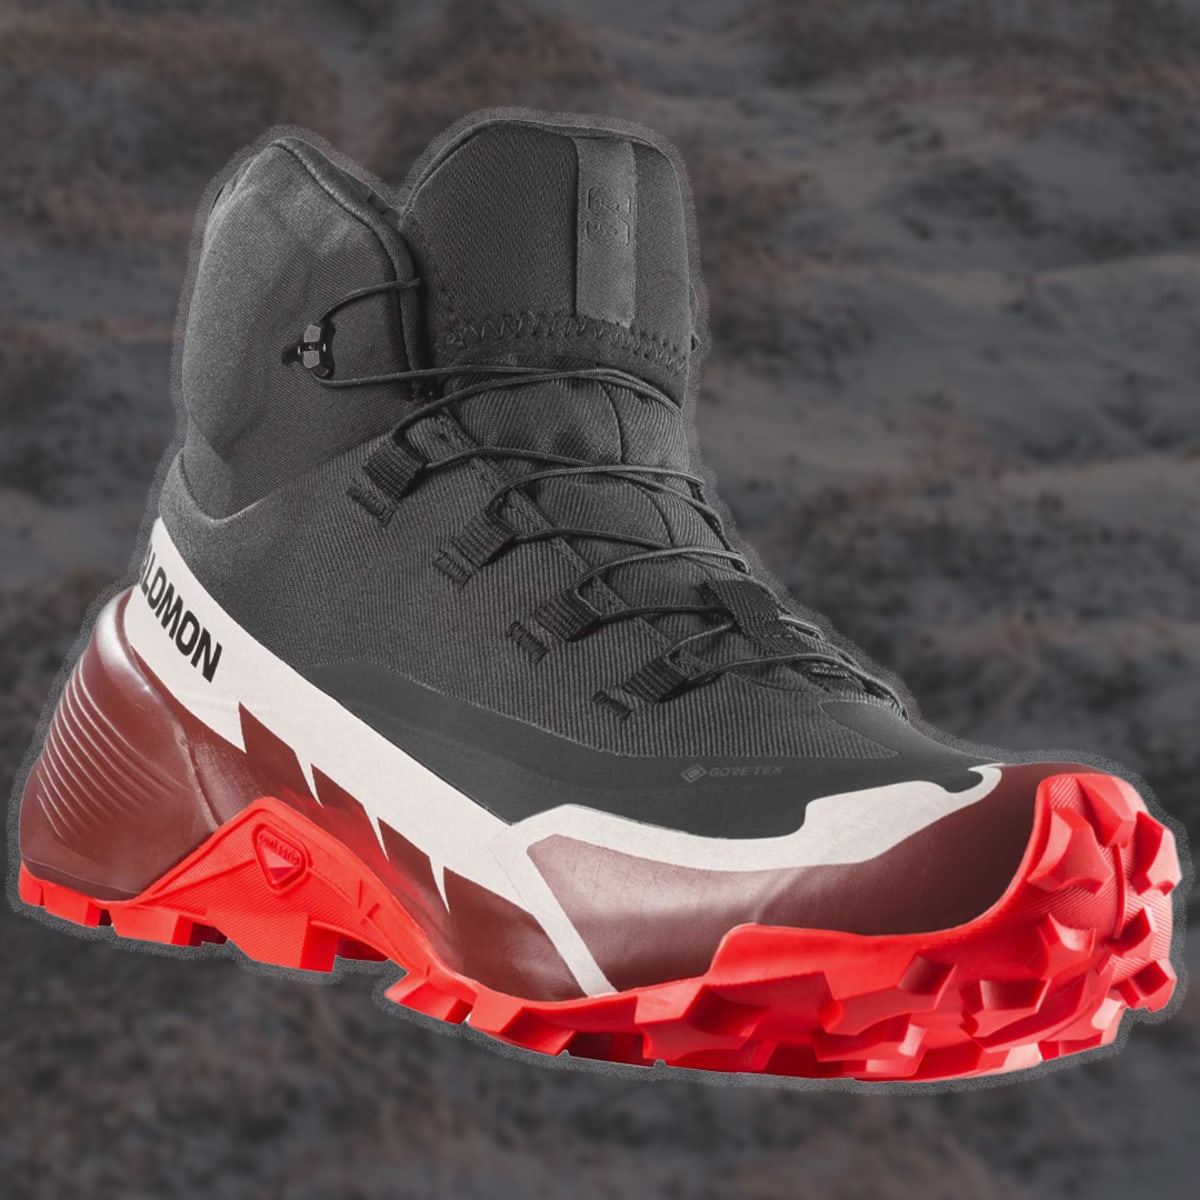 Salomon's Cross Hike 2 Mid Boot Is Up to 30% Off at REI - Men's